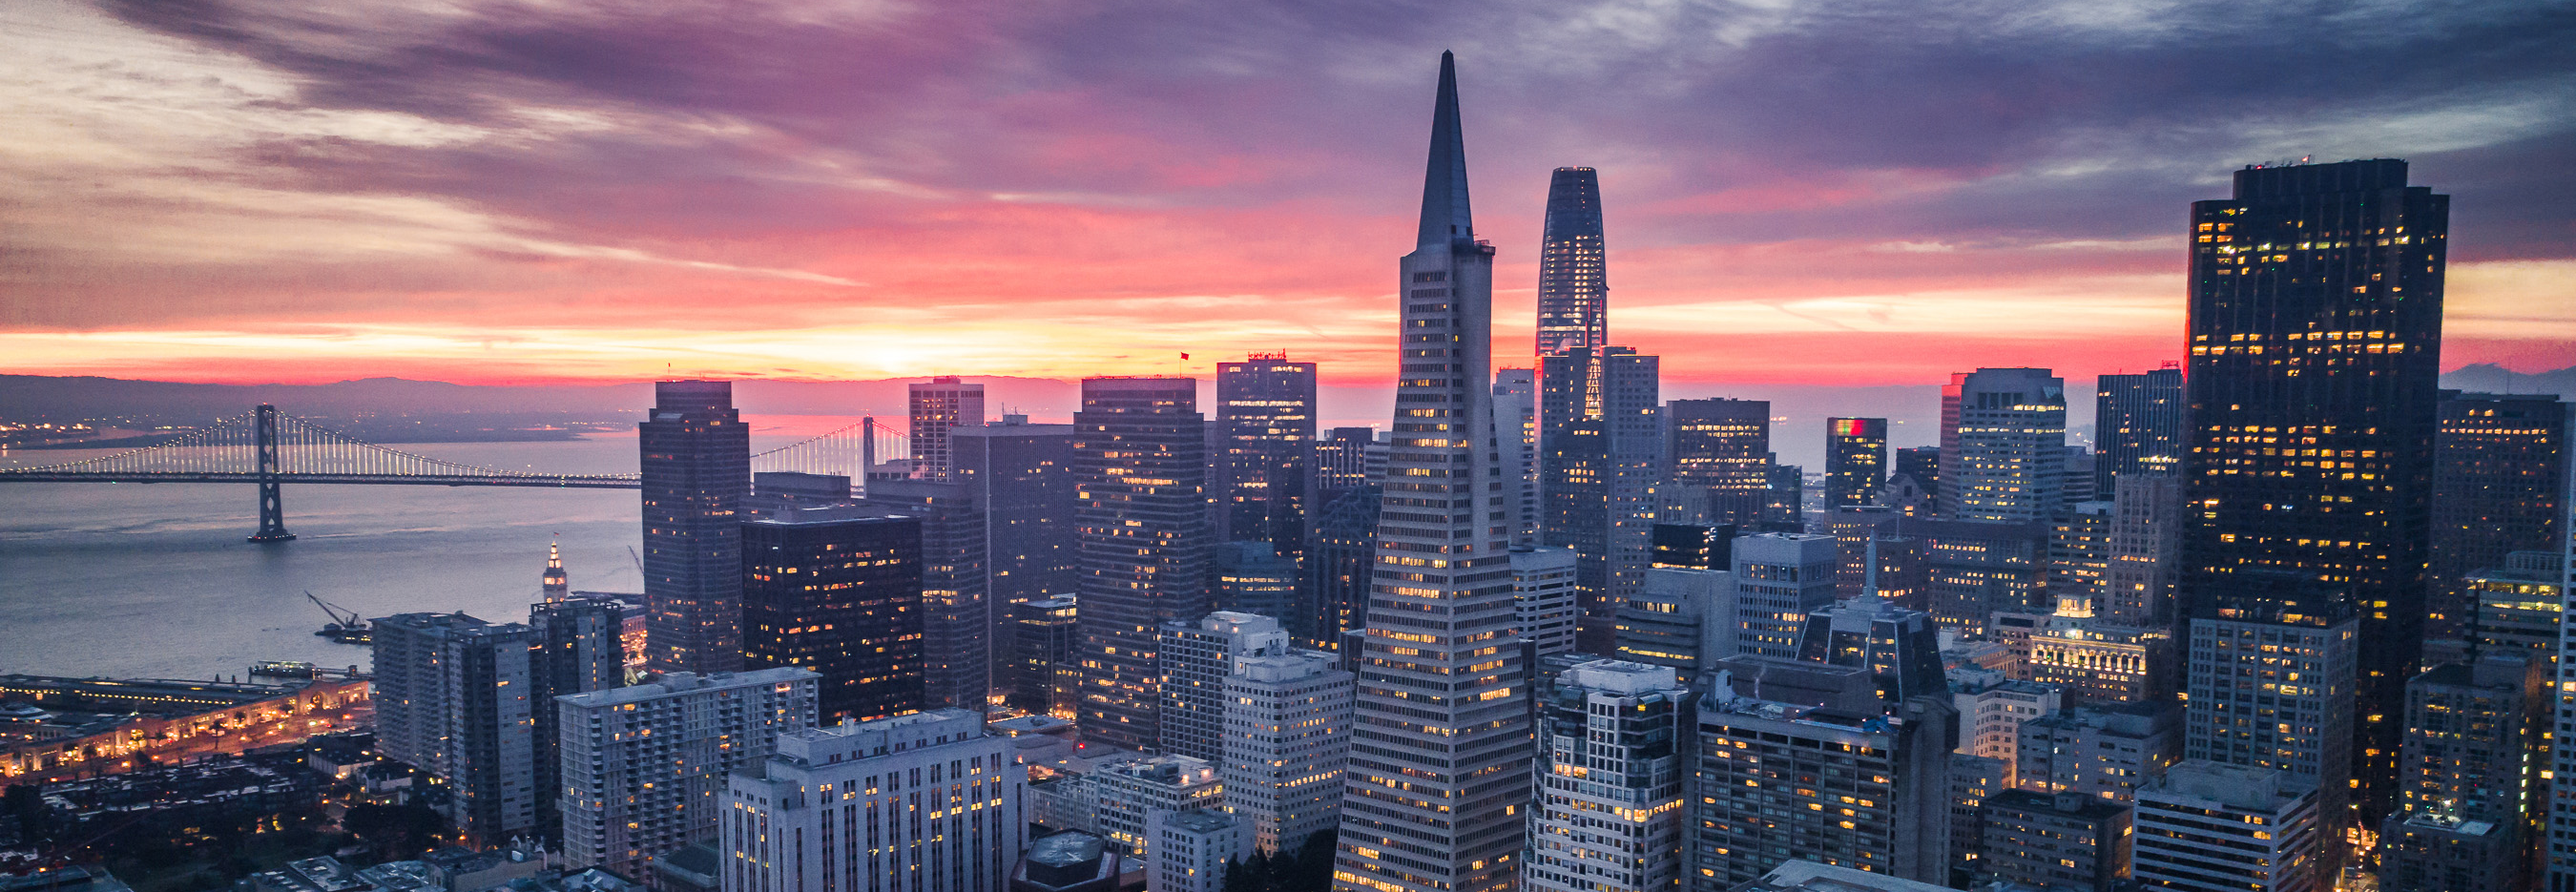 Photo of buildings in San Francisco at sunset